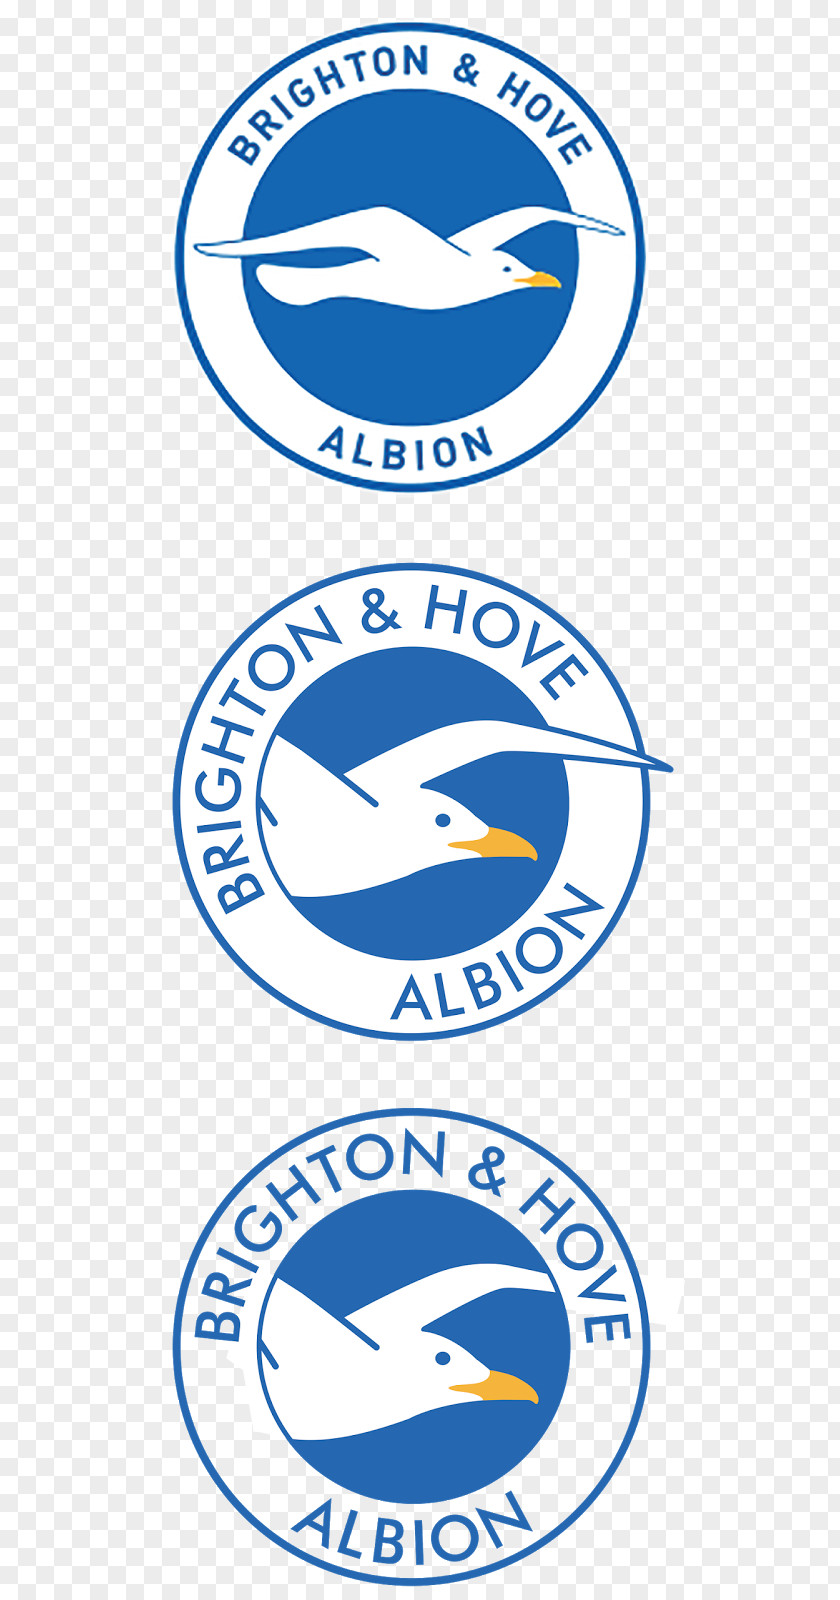 Hole In The Wall Brighton & Hove Albion F.C. Logo Trademark Brand PNG